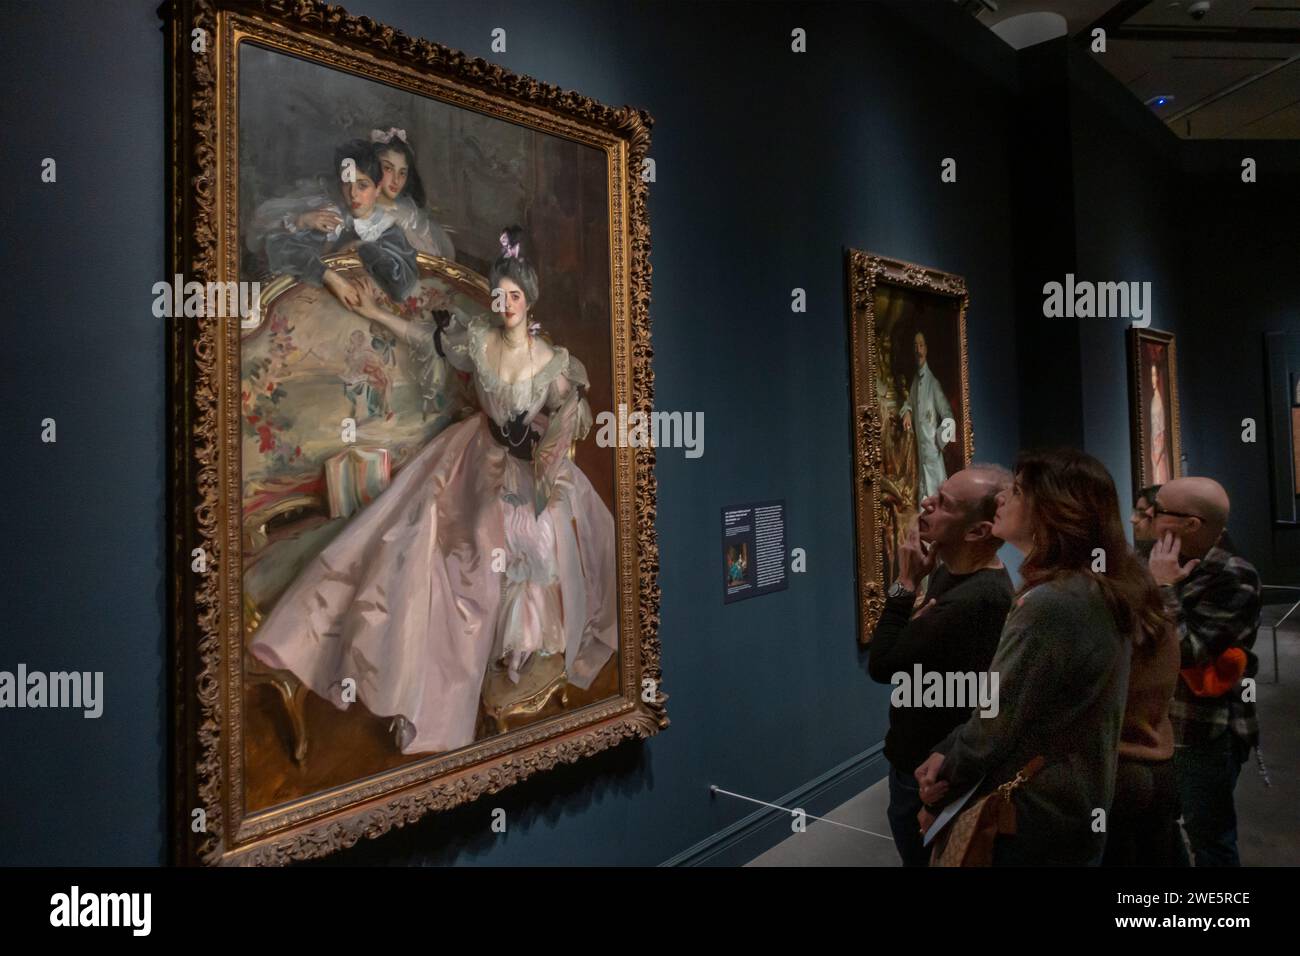 Die Show „Fashion by Sargent“ im Museum of Fine Arts in Boston, MA Stockfoto